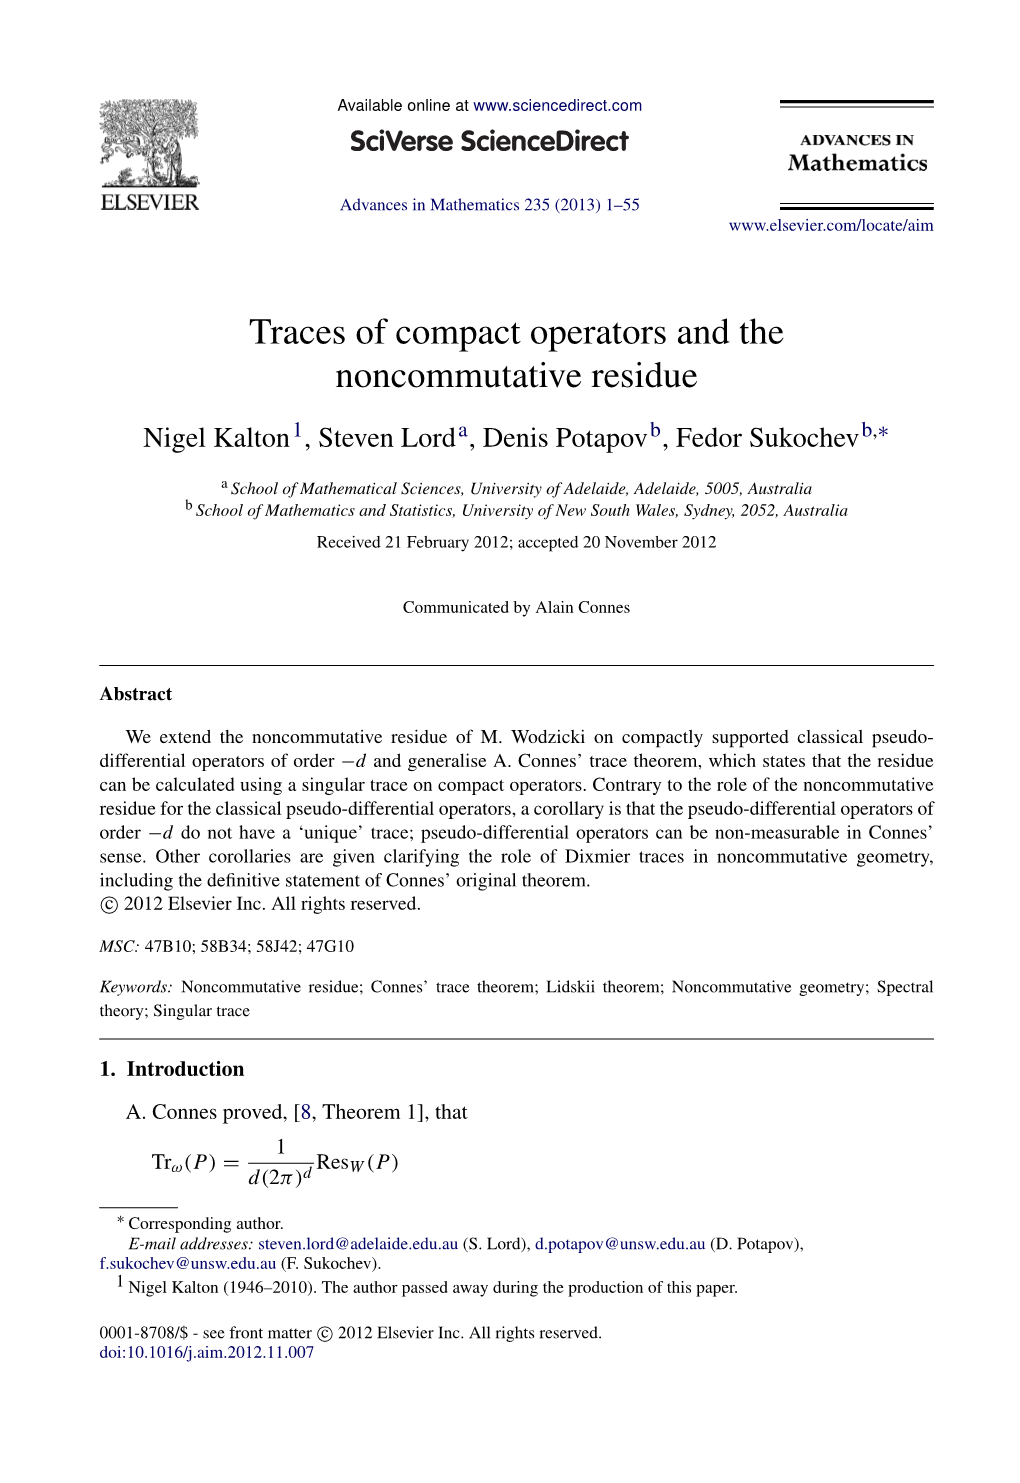 Traces of Compact Operators and the Noncommutative Residue